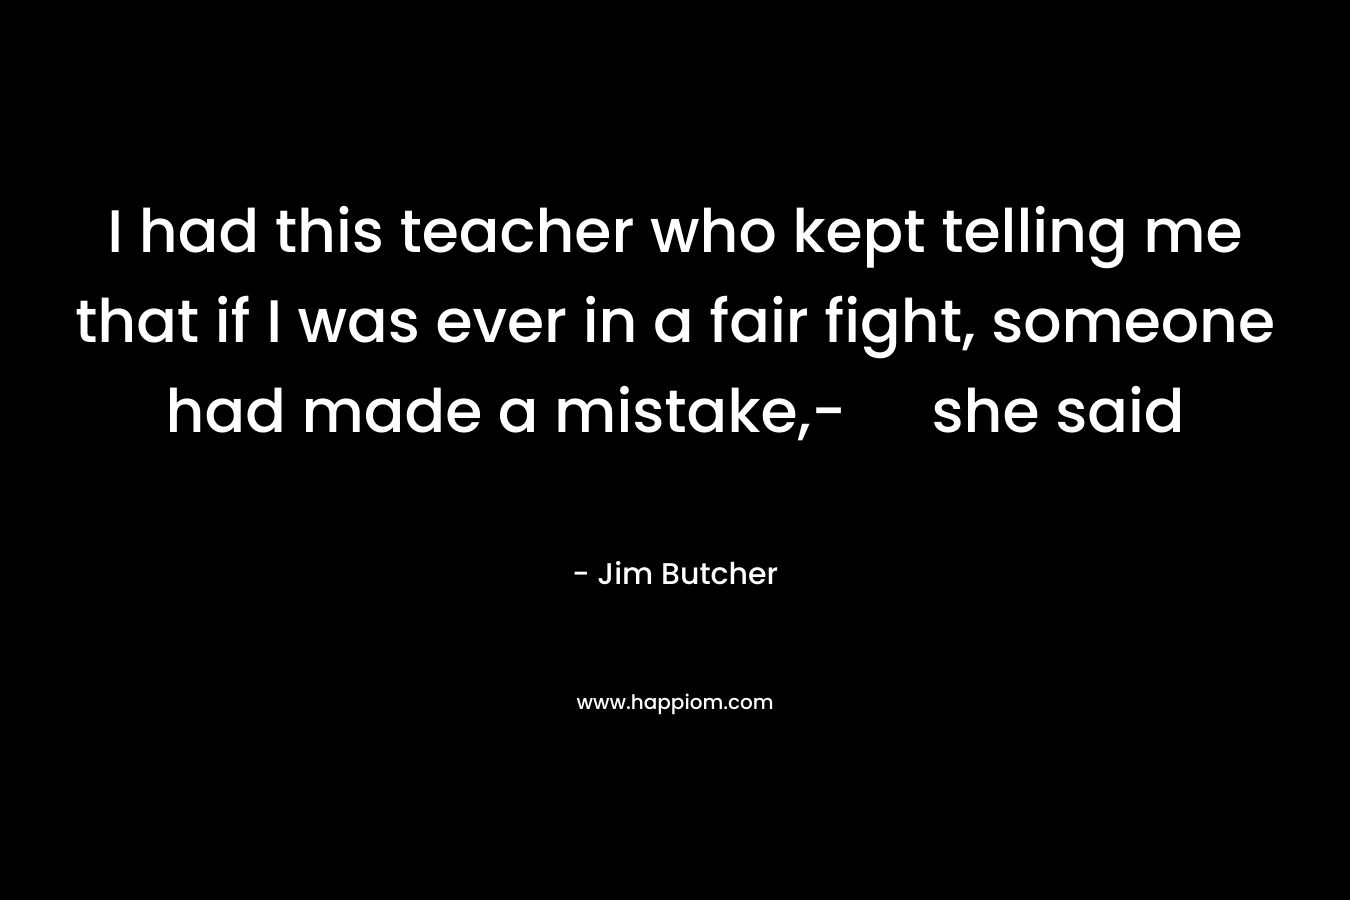 I had this teacher who kept telling me that if I was ever in a fair fight, someone had made a mistake,- she said